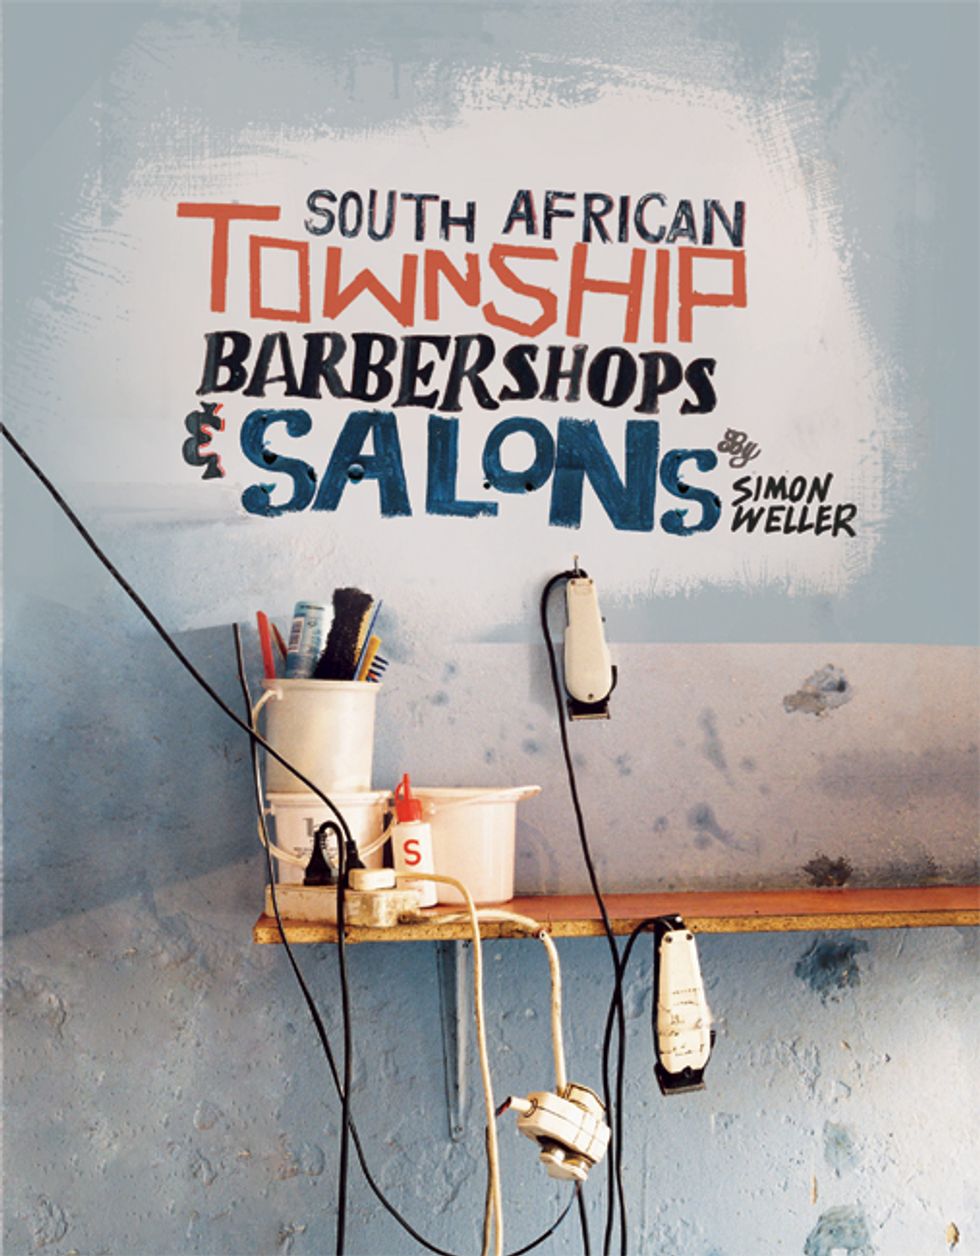 Books: South African Township Barbershops and Salons by Simon Weller